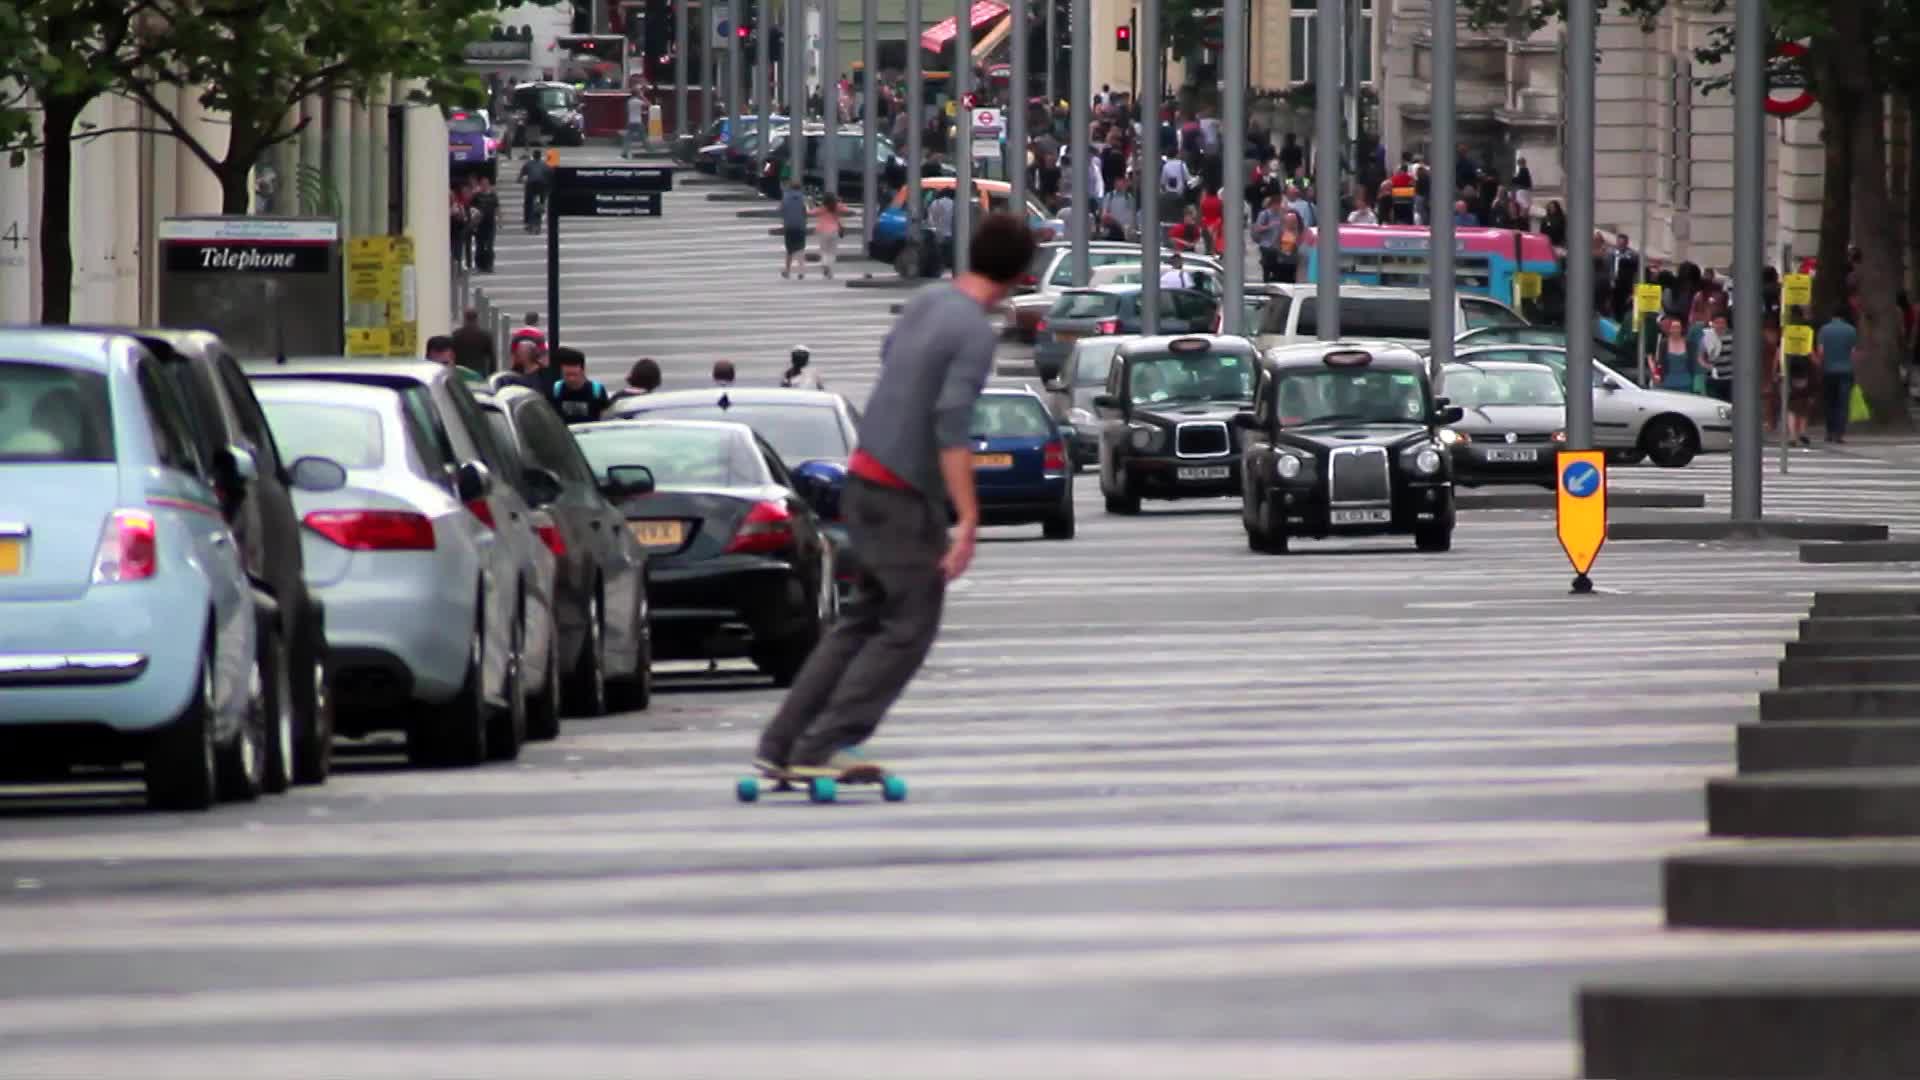 Skateboarding in the Road - Commercials - 4fun.com